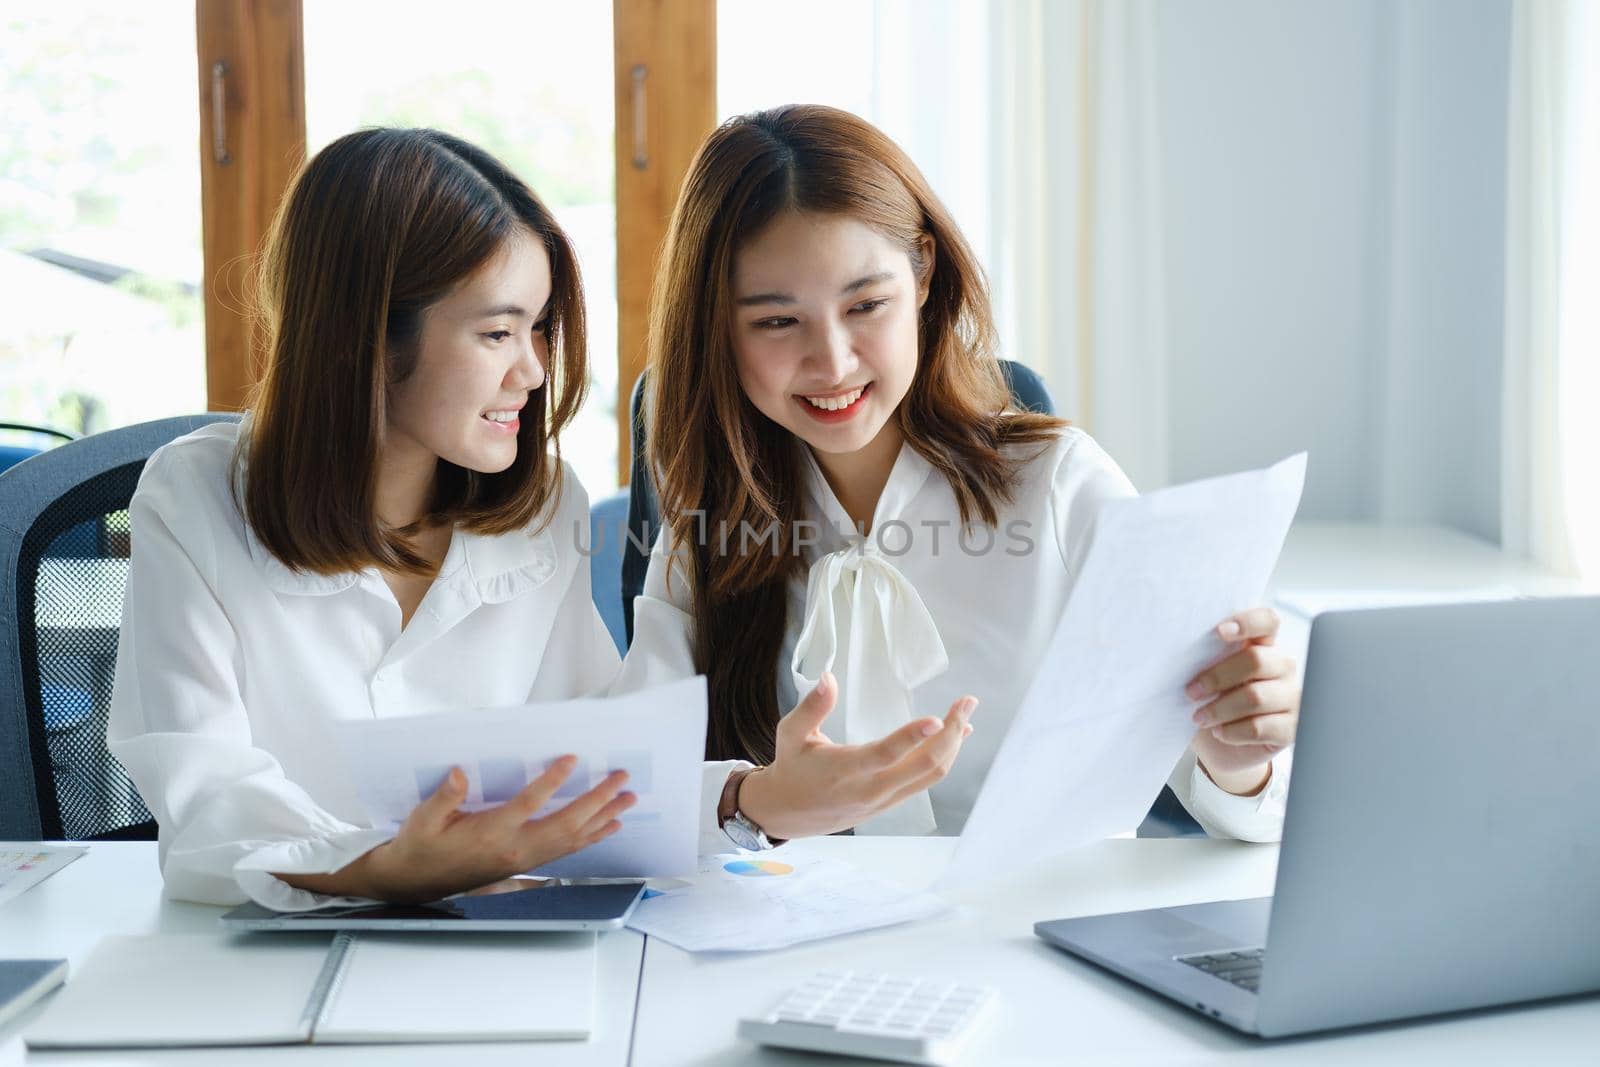 Consulting, learning, marketing, investment, finance, data analysis, research, two Asian women smiling and holding papers, sitting and analyzing financial statements and using computers at work